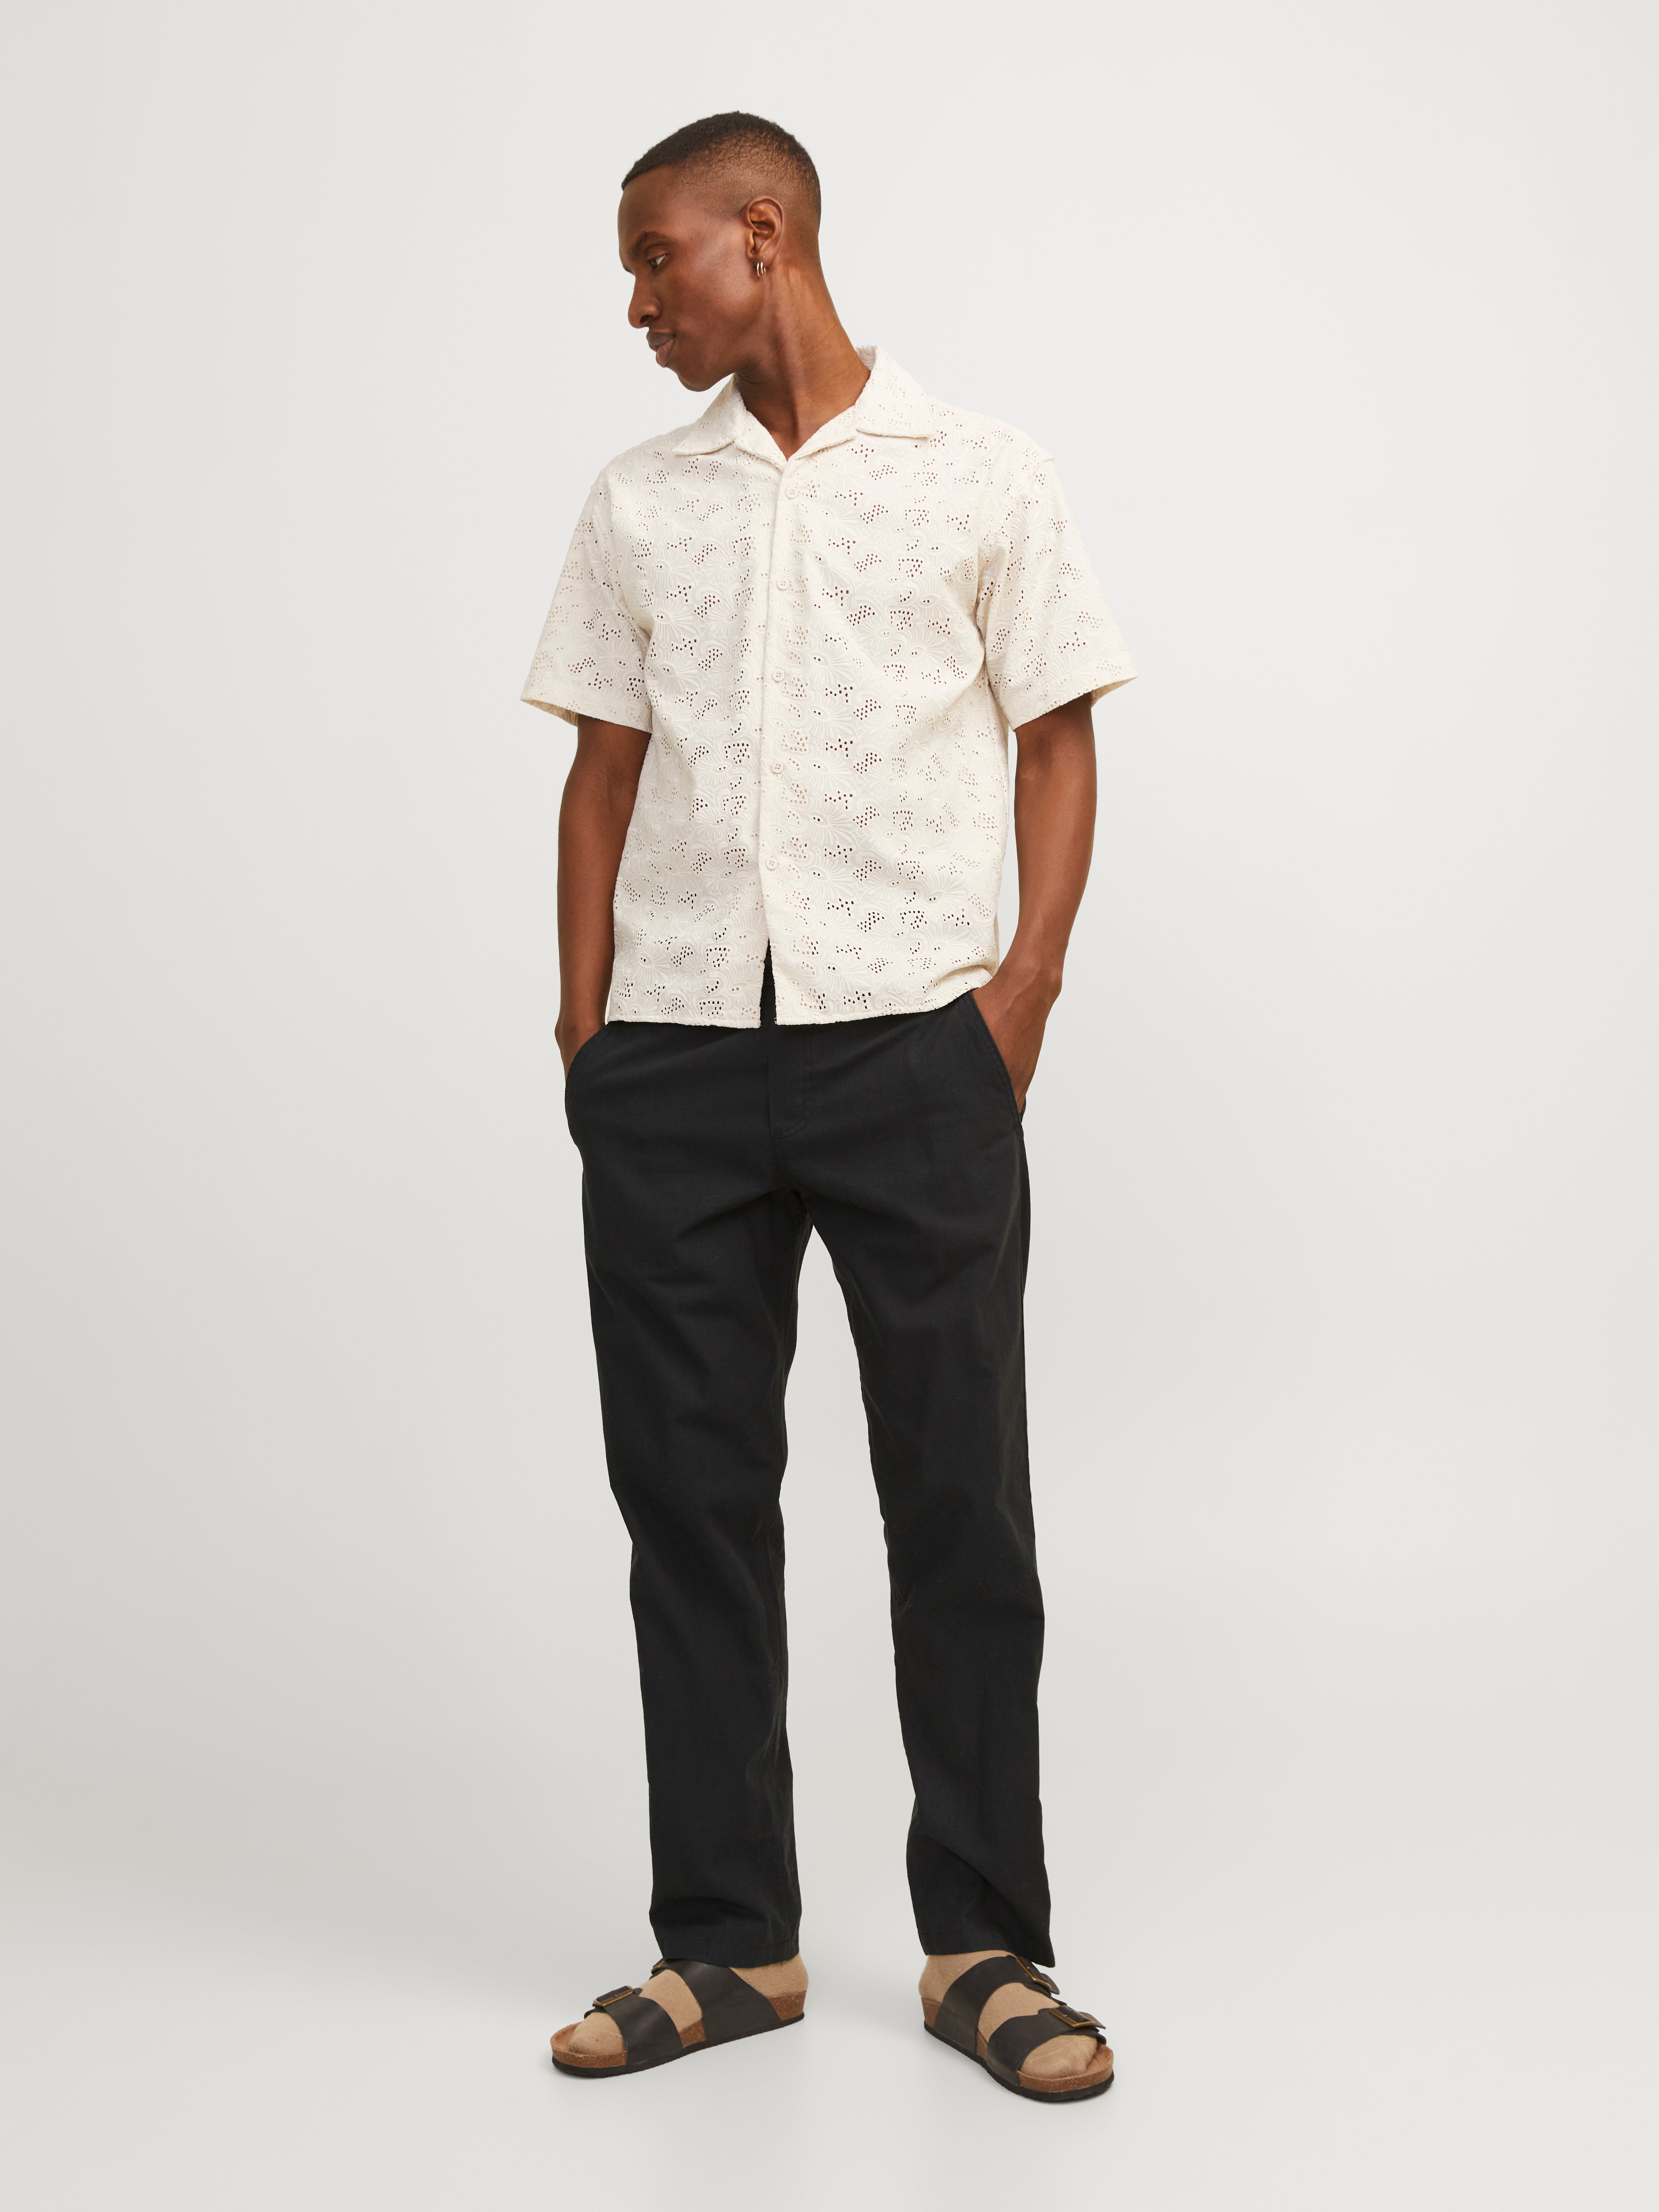 Relaxed Fit Classic trousers